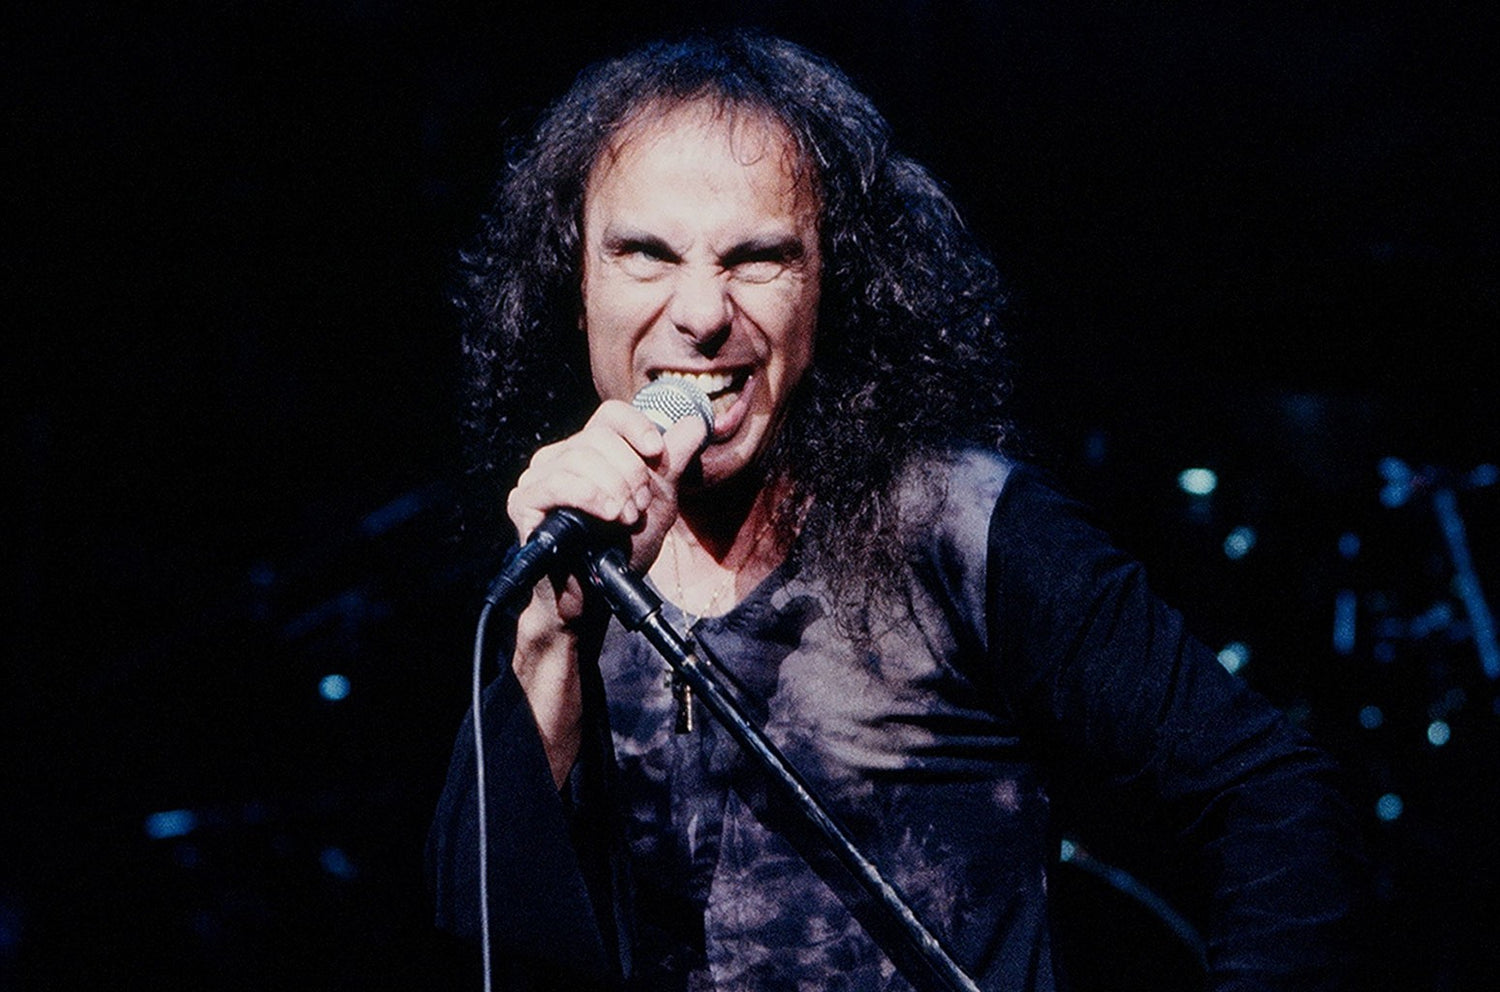 The Ronnie James Dio autobiography has an official release date